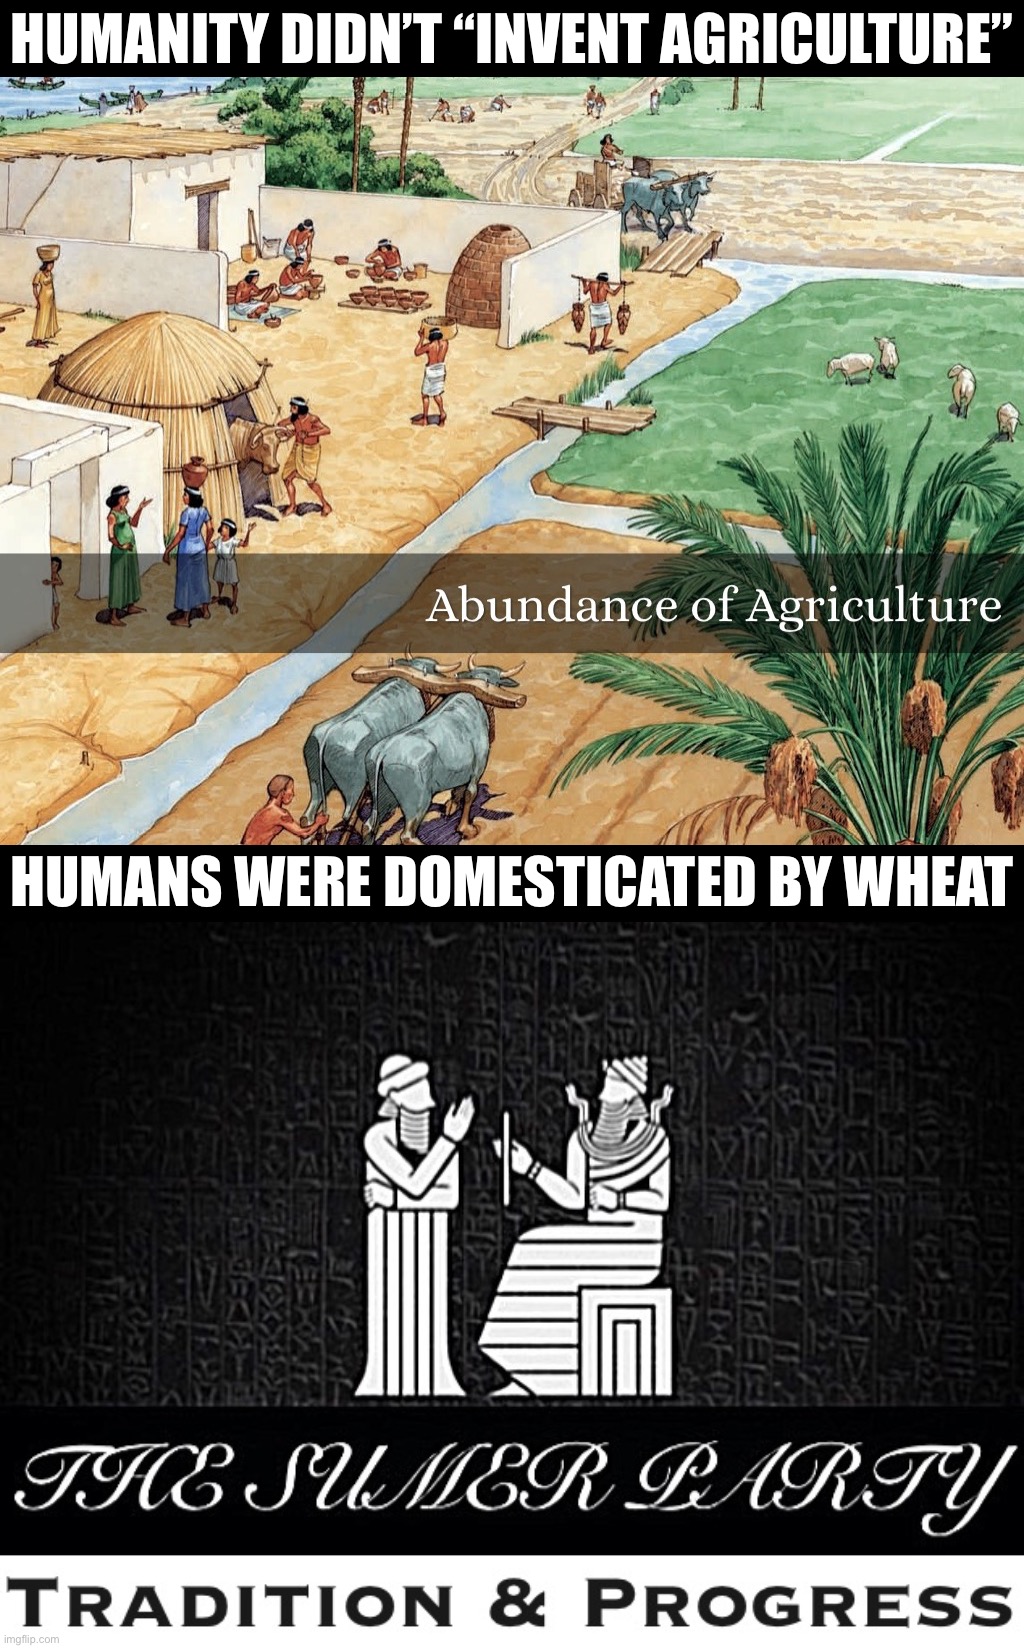 You break your back struggling to grow endless rows of glorified grass. Who do YOU think is profiting here? #farmcuck #redpilled | HUMANITY DIDN’T “INVENT AGRICULTURE”; HUMANS WERE DOMESTICATED BY WHEAT | image tagged in abundance of agriculture,the sumer party logo tradition progress,wheat,agriculture,redpilled | made w/ Imgflip meme maker